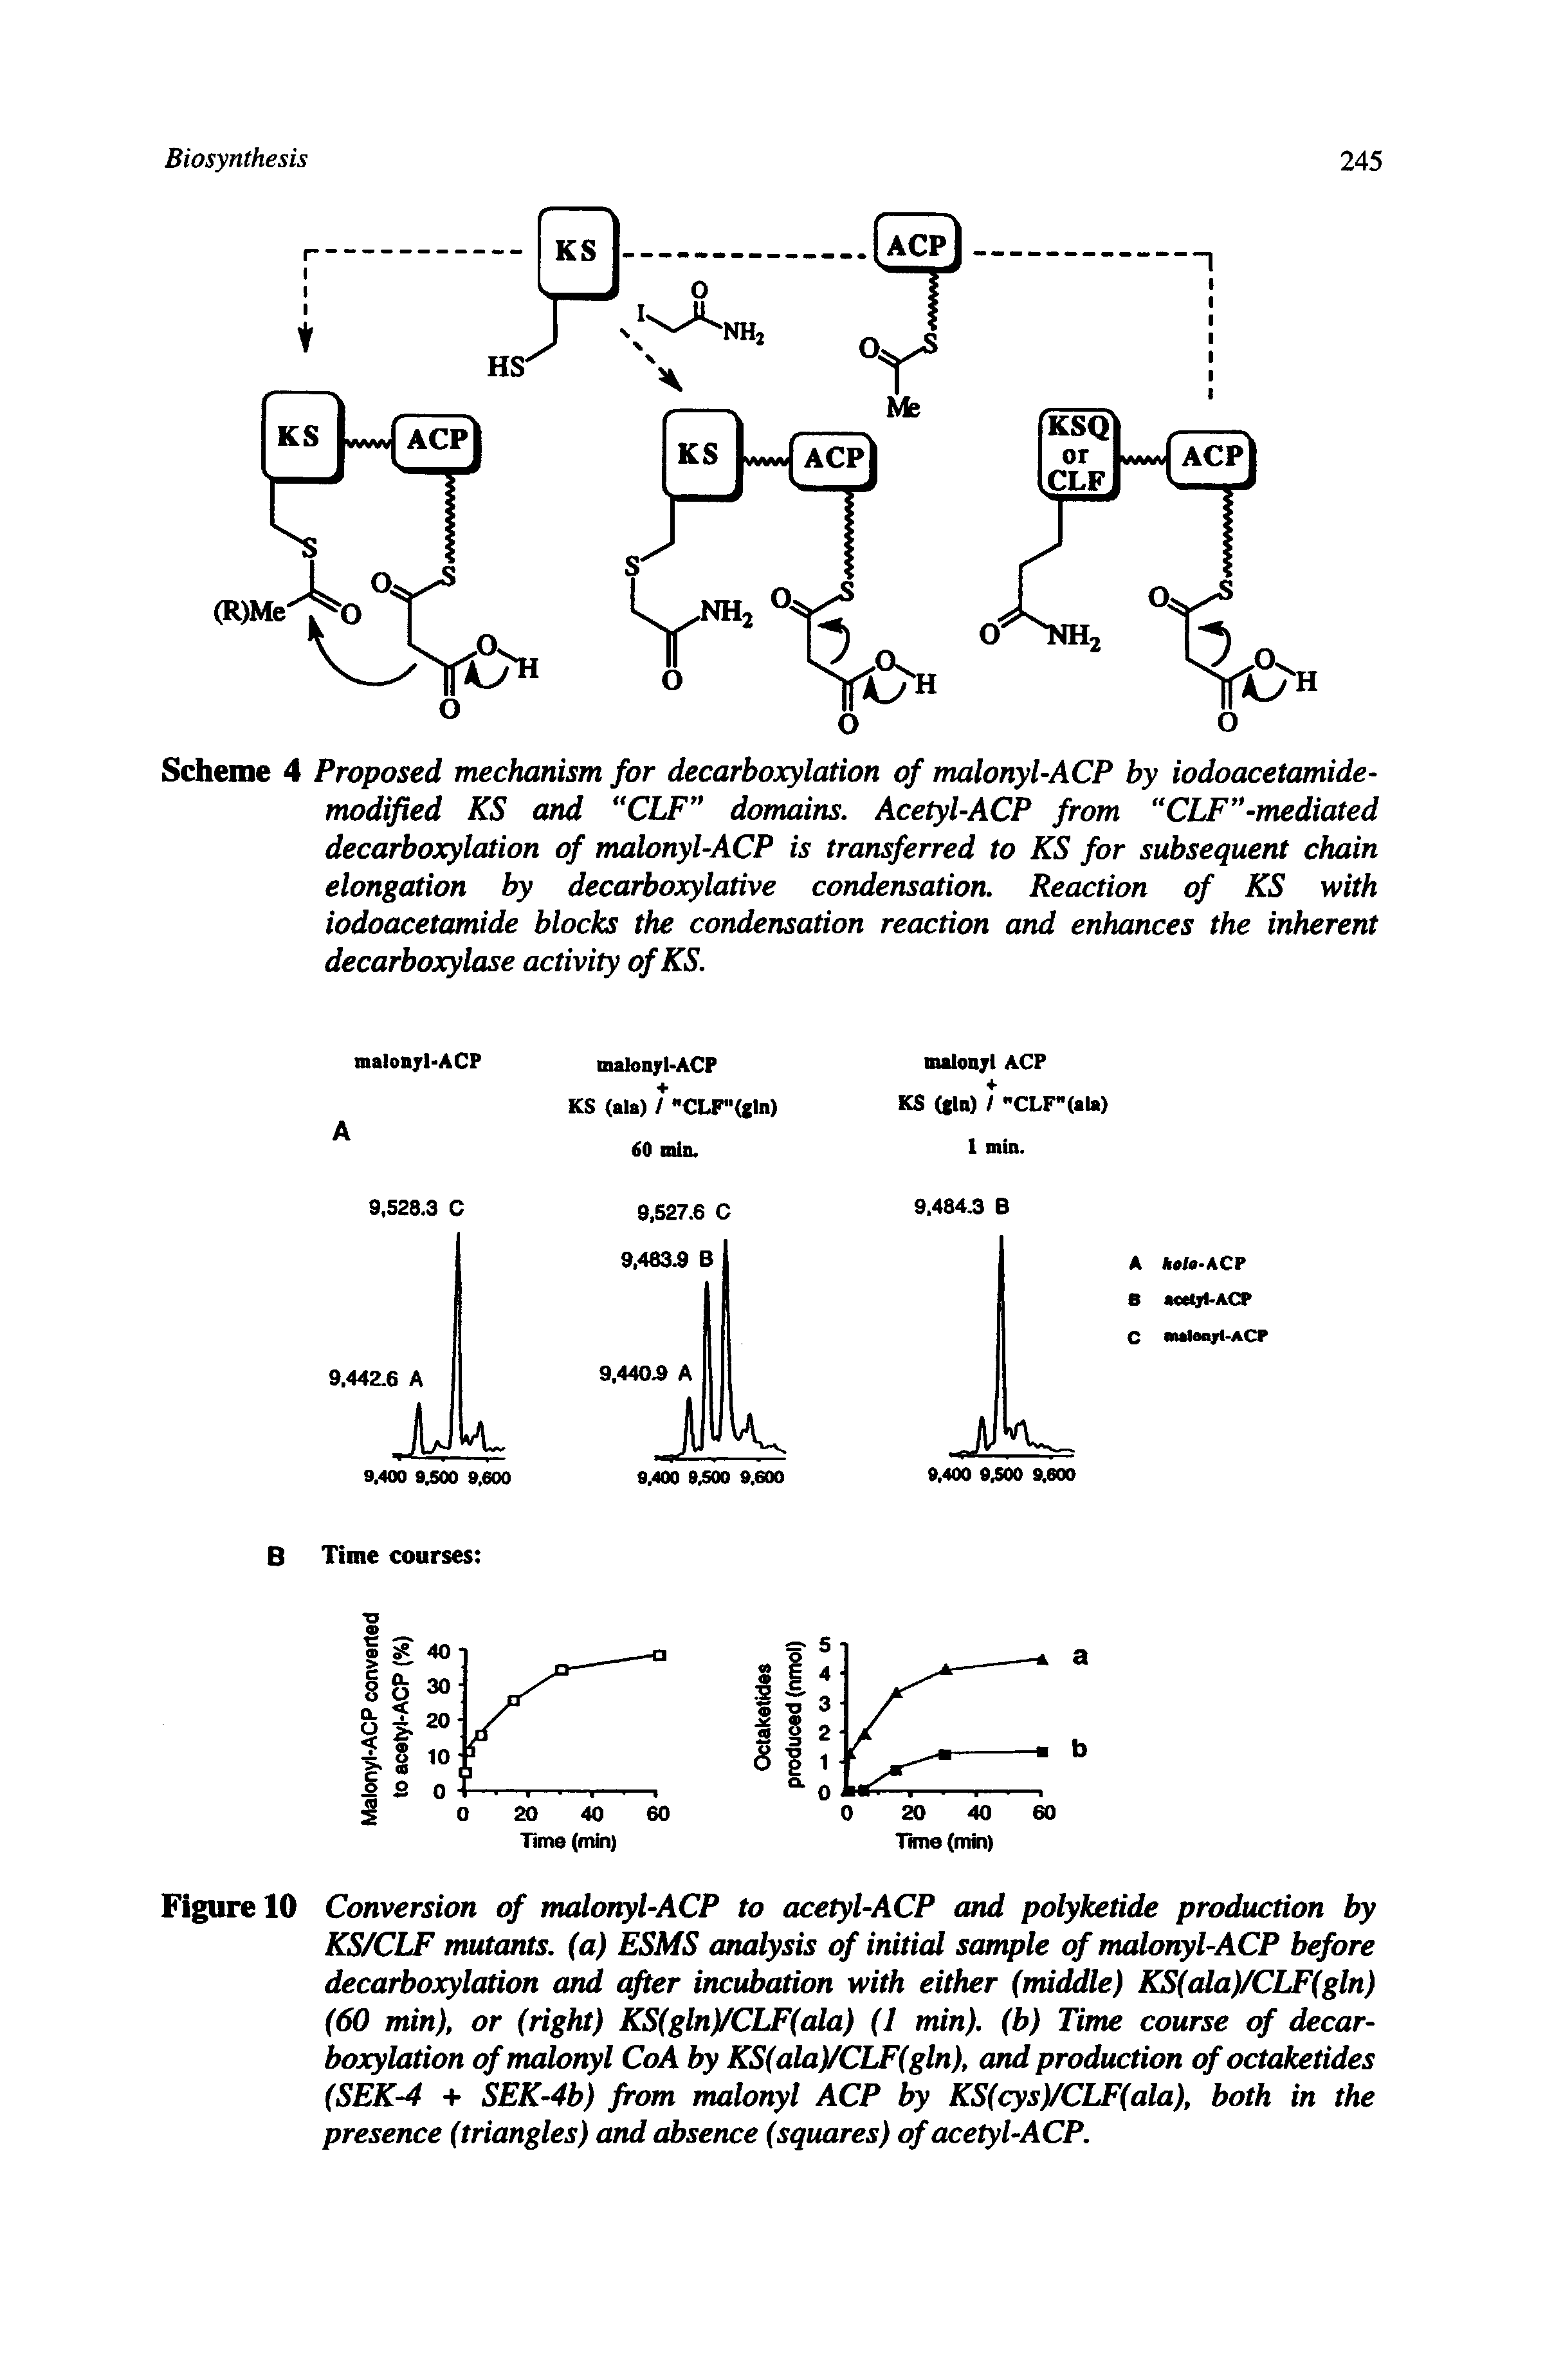 Figure 10 Conversion of malonyl-ACP to acetyl-ACP and polyketide production by KS/CLF mutants, (a) ESMS analysis of initial sample of malonyl-ACP before decarboxylation and after incubation with either (middle) KS(ala)/CLF(gln) (60 min), or (right) KS(gln)/CLF(ala) (1 min), (b) Time course of decarboxylation of malonyl CoA by KS(ala)/CLF(gln), and production of octaketides (SEK-4 + SEK-4b) from malonyl ACP by KS(cys)/CLF(ala), both in the presence (triangles) and absence (squares) of acetyl-ACP.